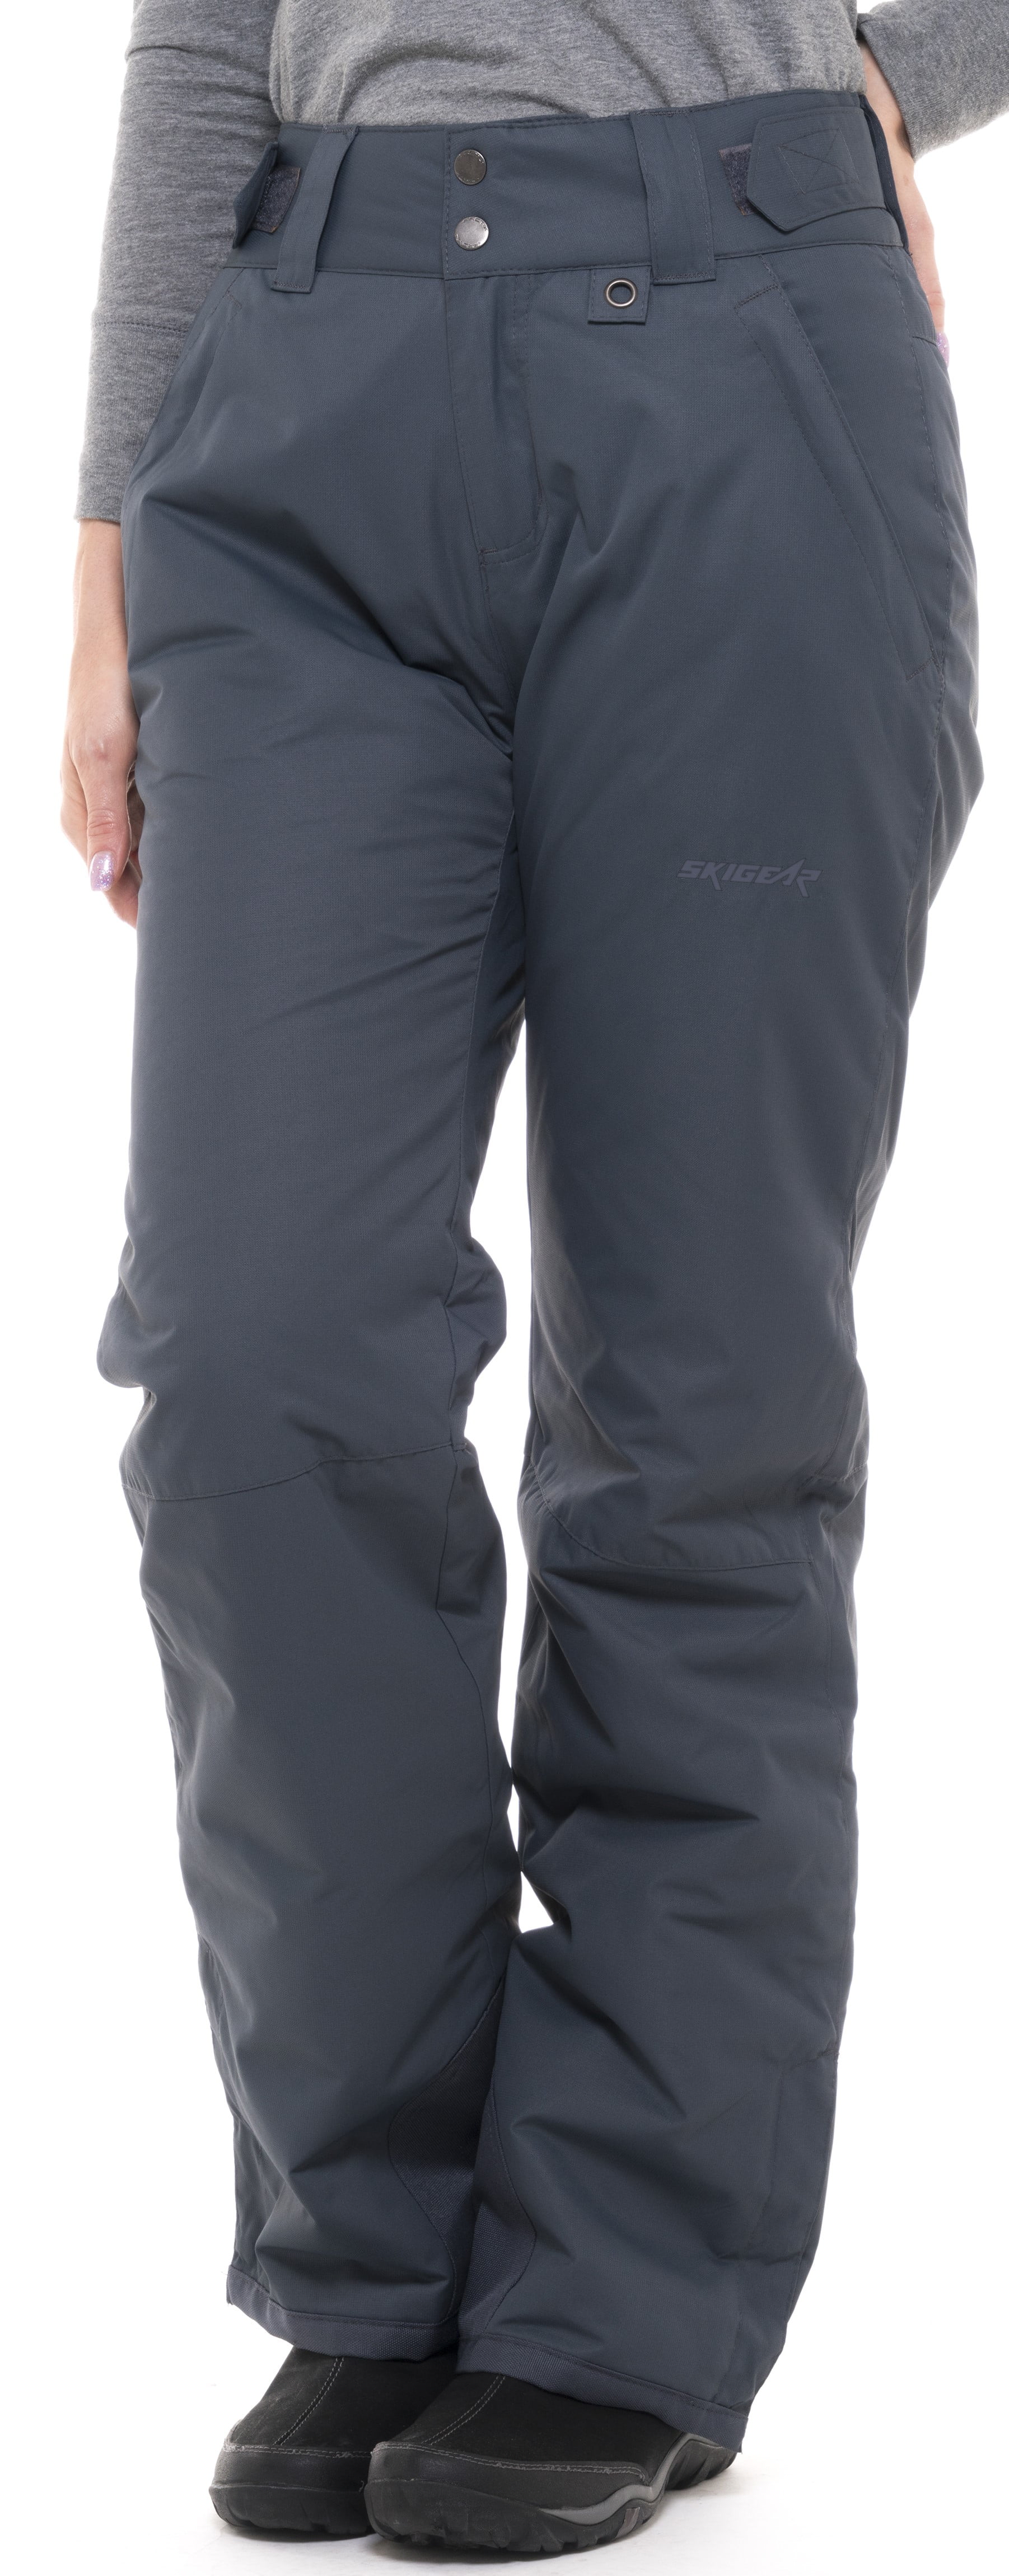 ARCTIX Womens Insulated Snow Ski Pants Black 1800 2x Water Resistant 2xl for sale online 